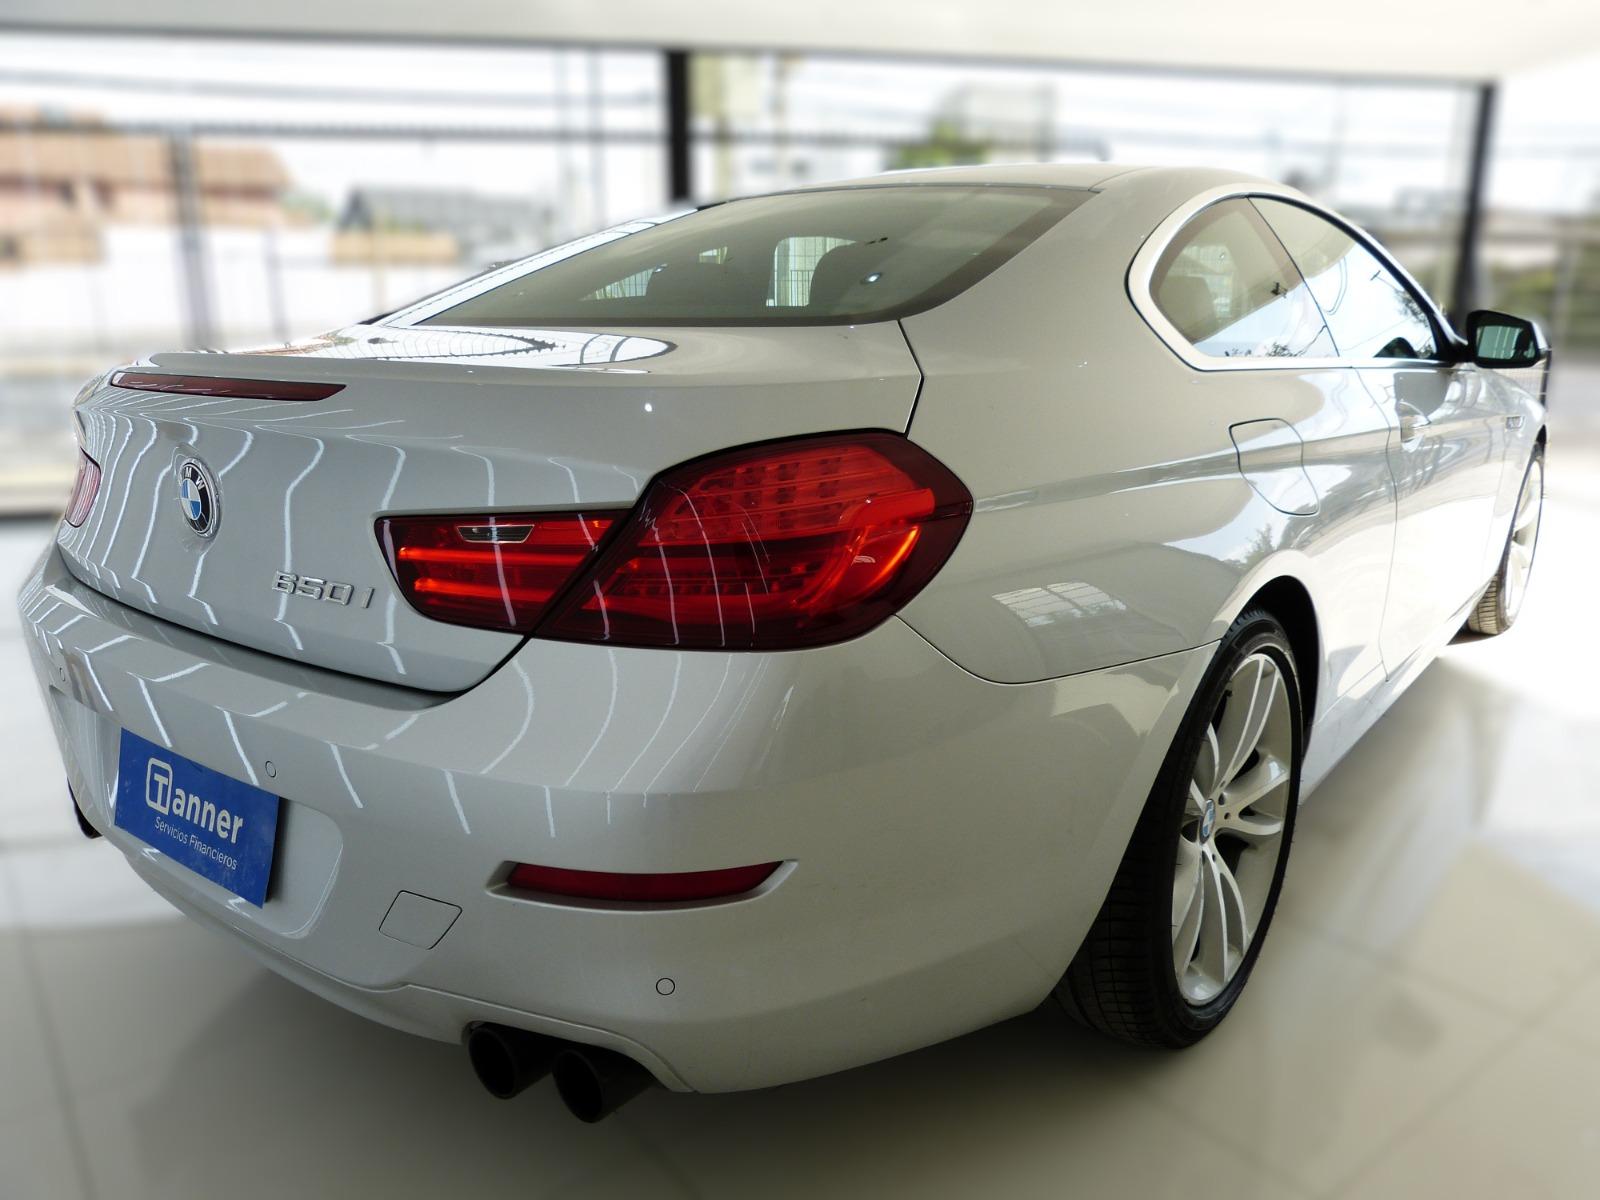 BMW 650 4.4 V8 TWIN TURBO 2012 IMPECABLE - FULL MOTOR